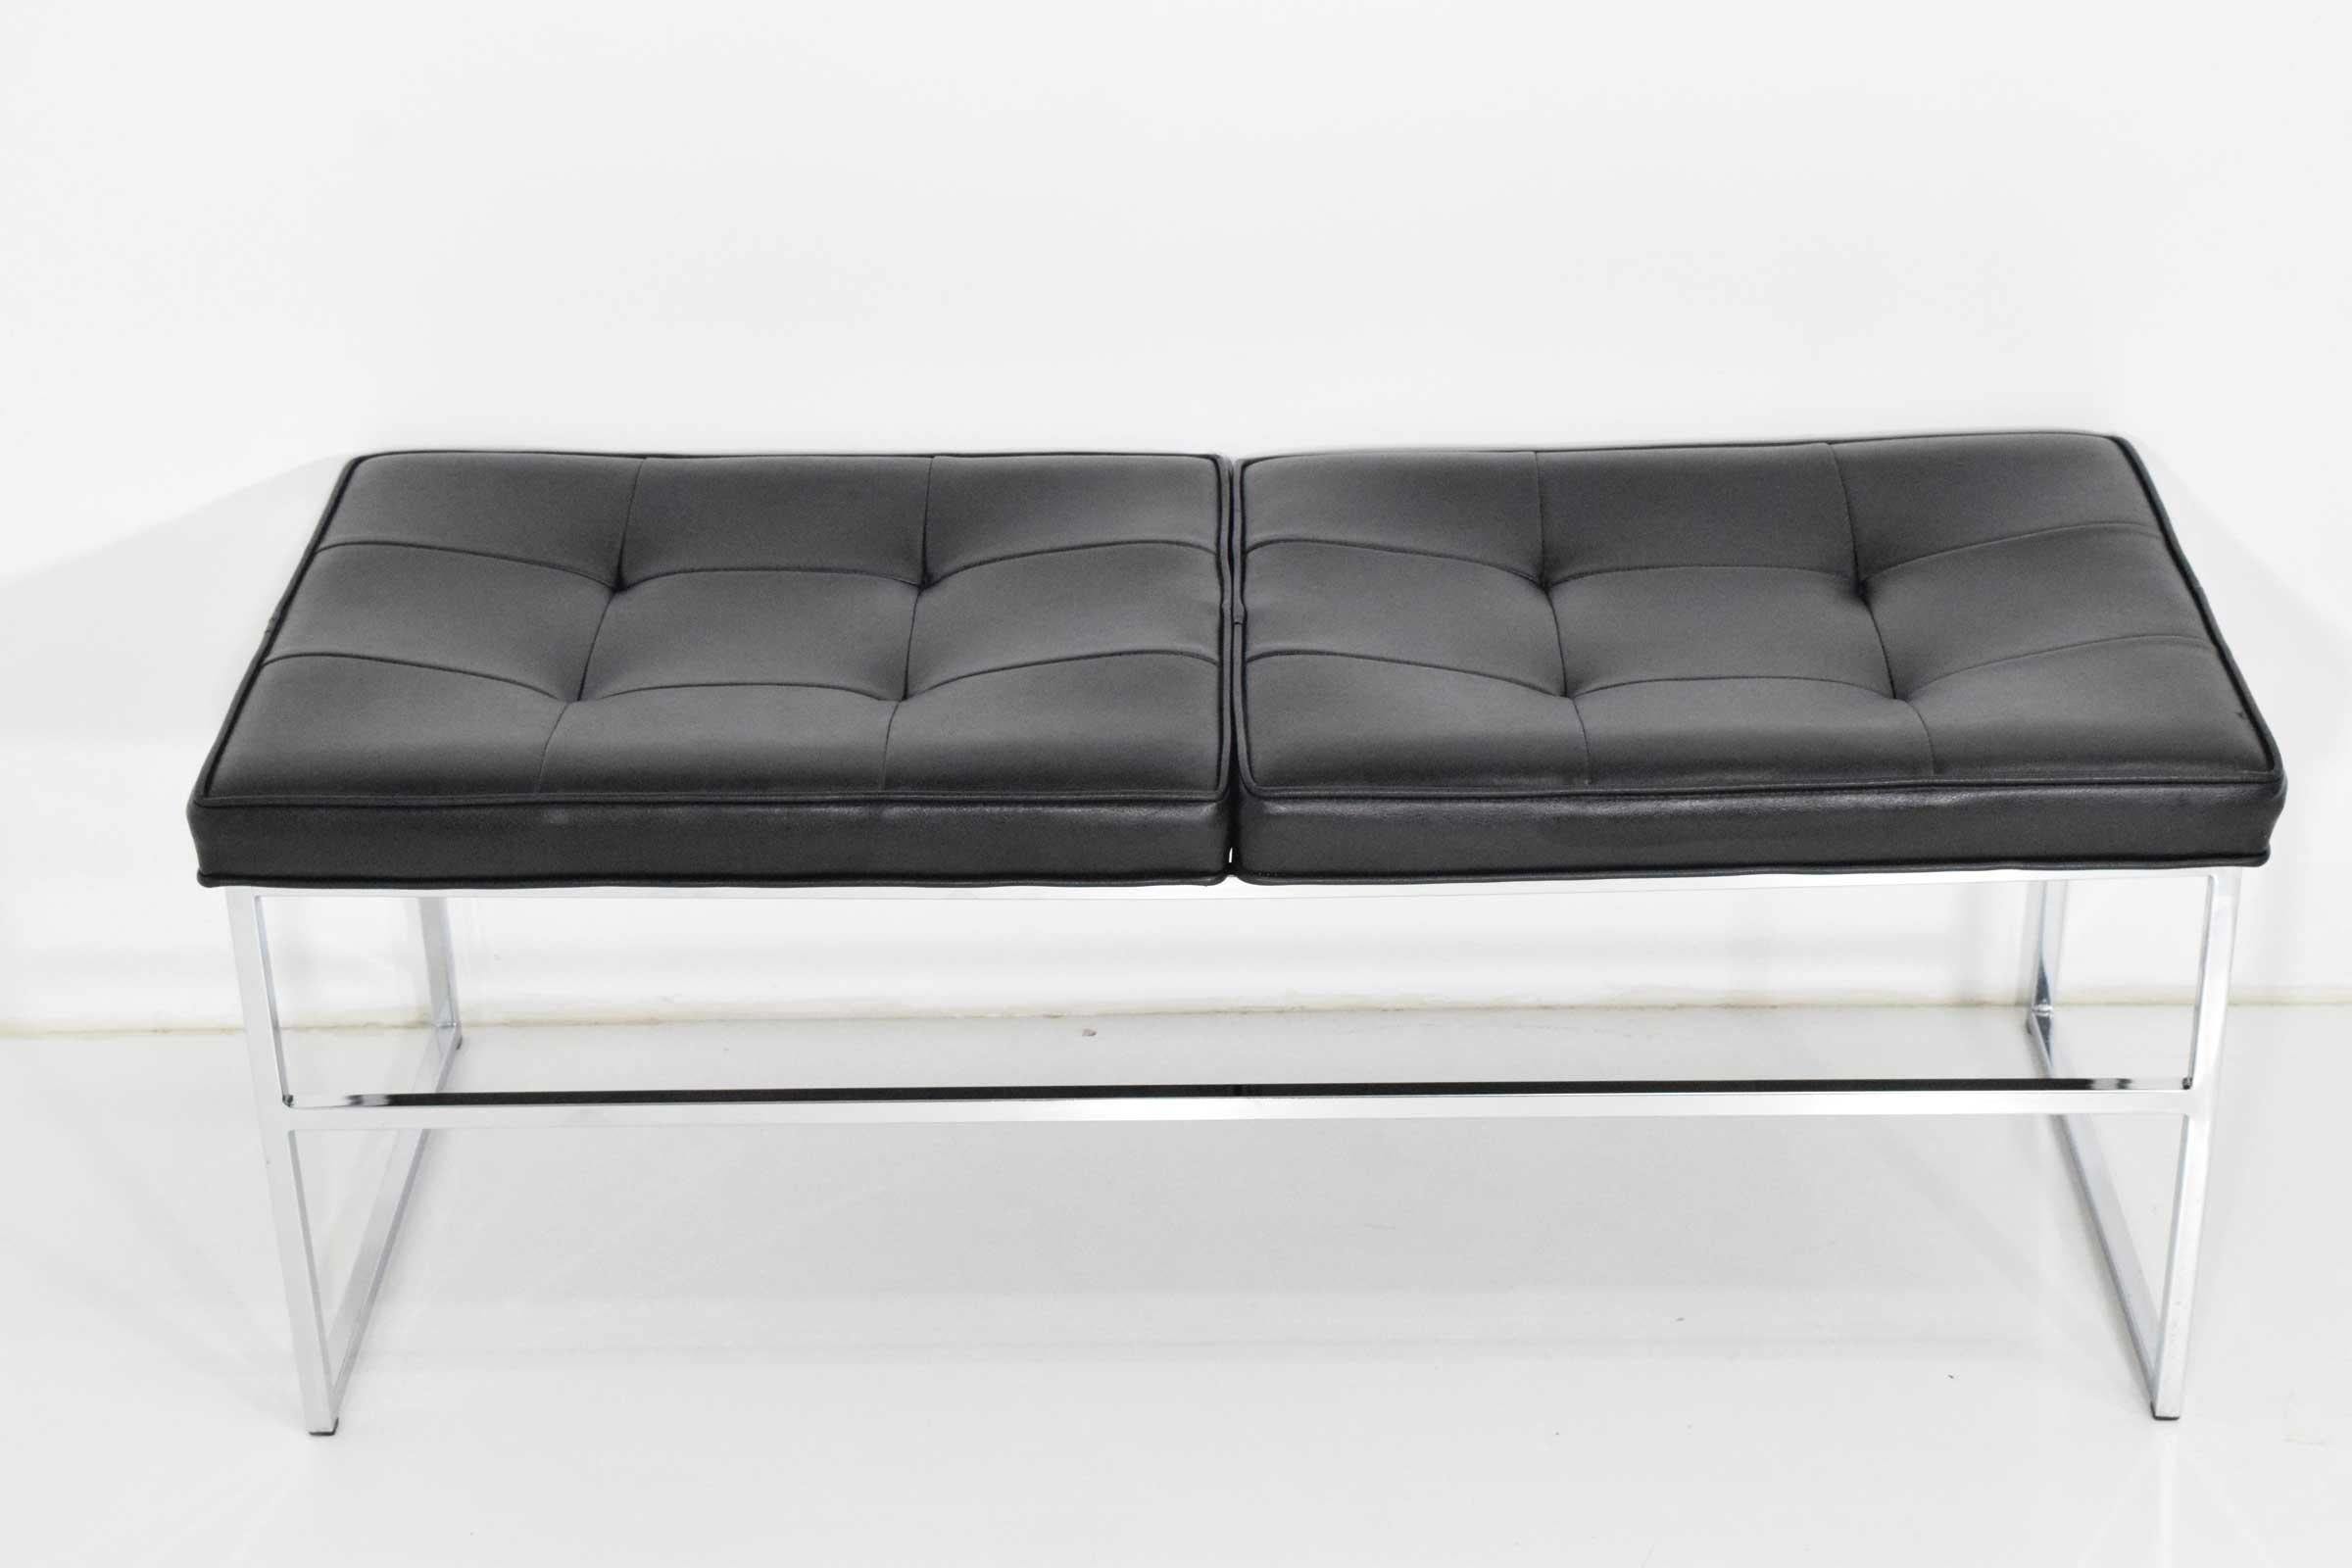 Thin frame chrome and leather bench by Steelcase.